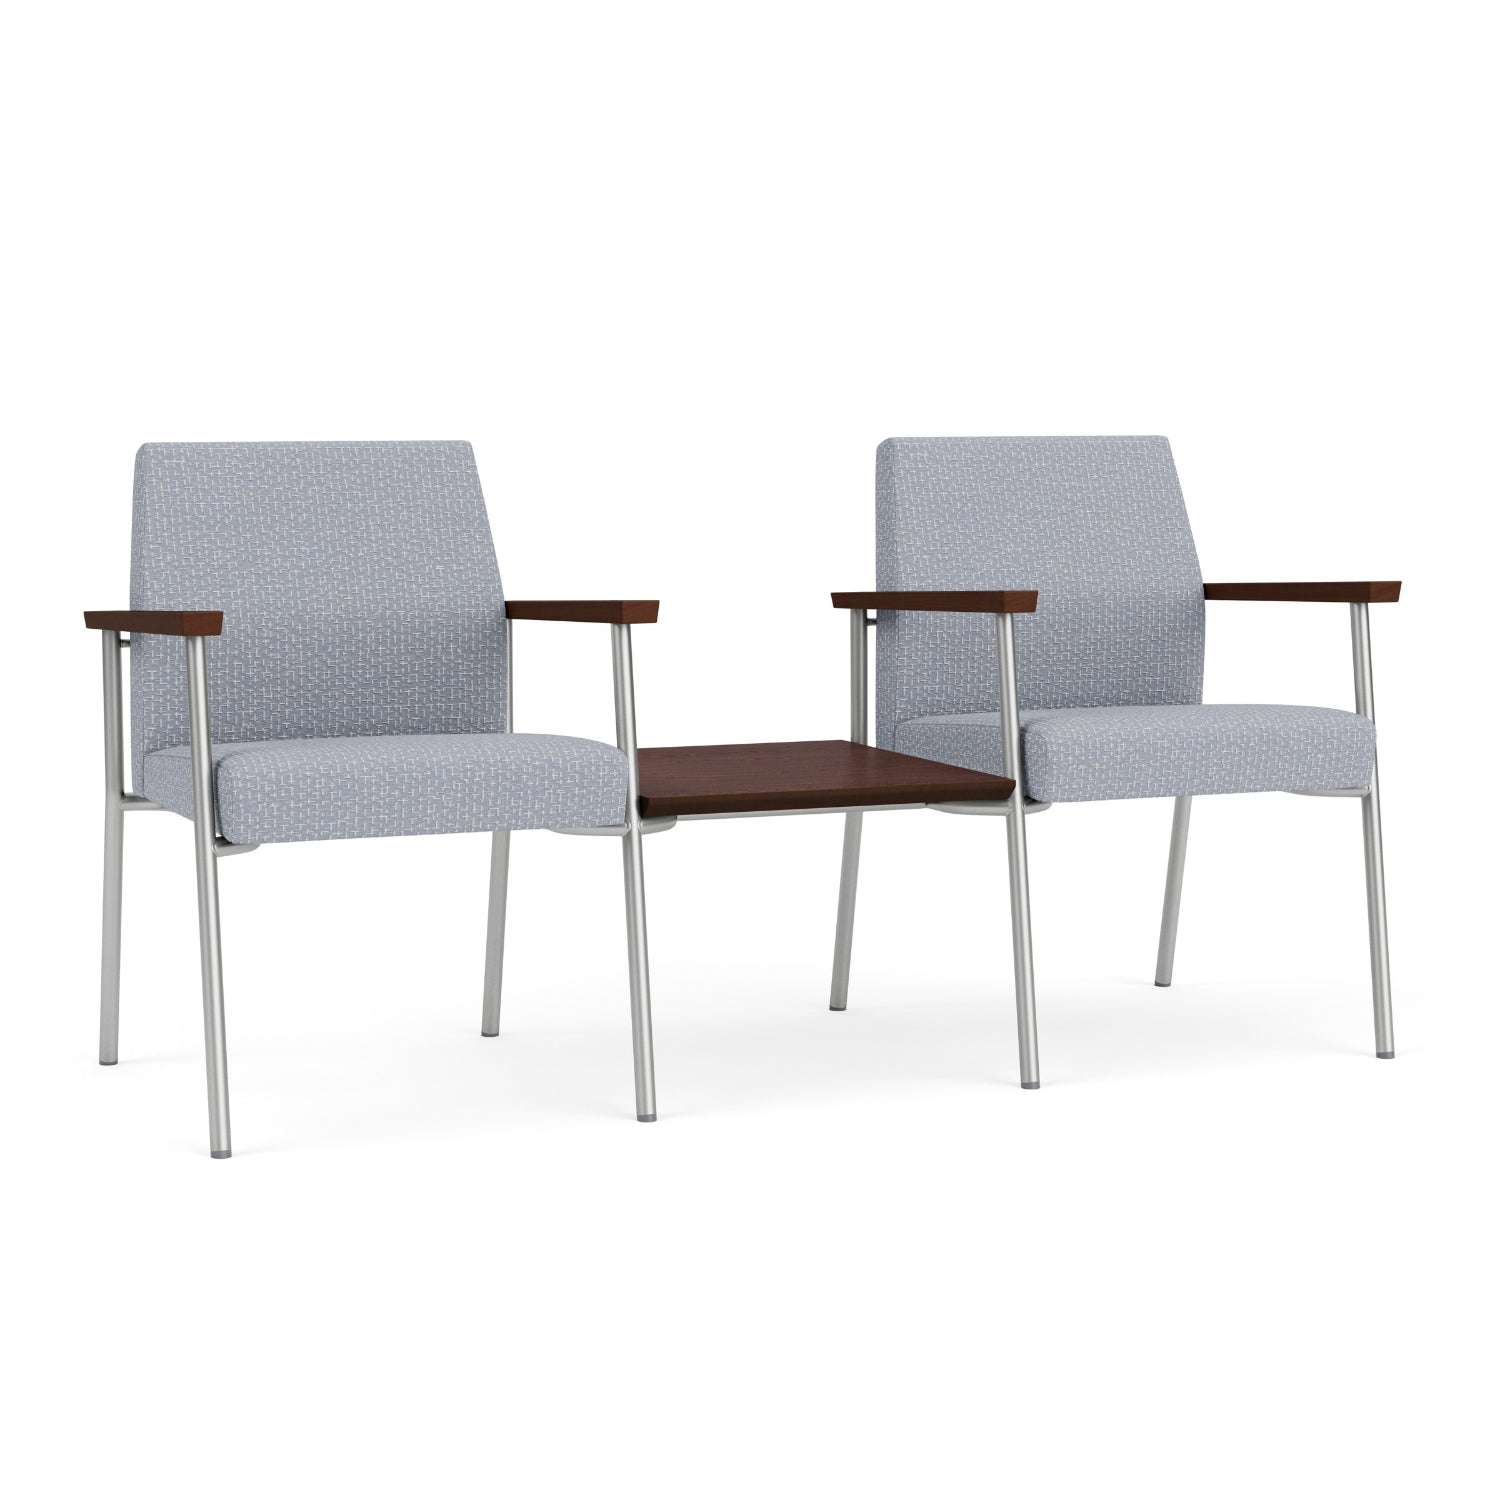 Mystic Guest Collection Reception Seating, 2 Chairs with Connecting Center Table, Designer Fabric Upholstery, FREE SHIPPING